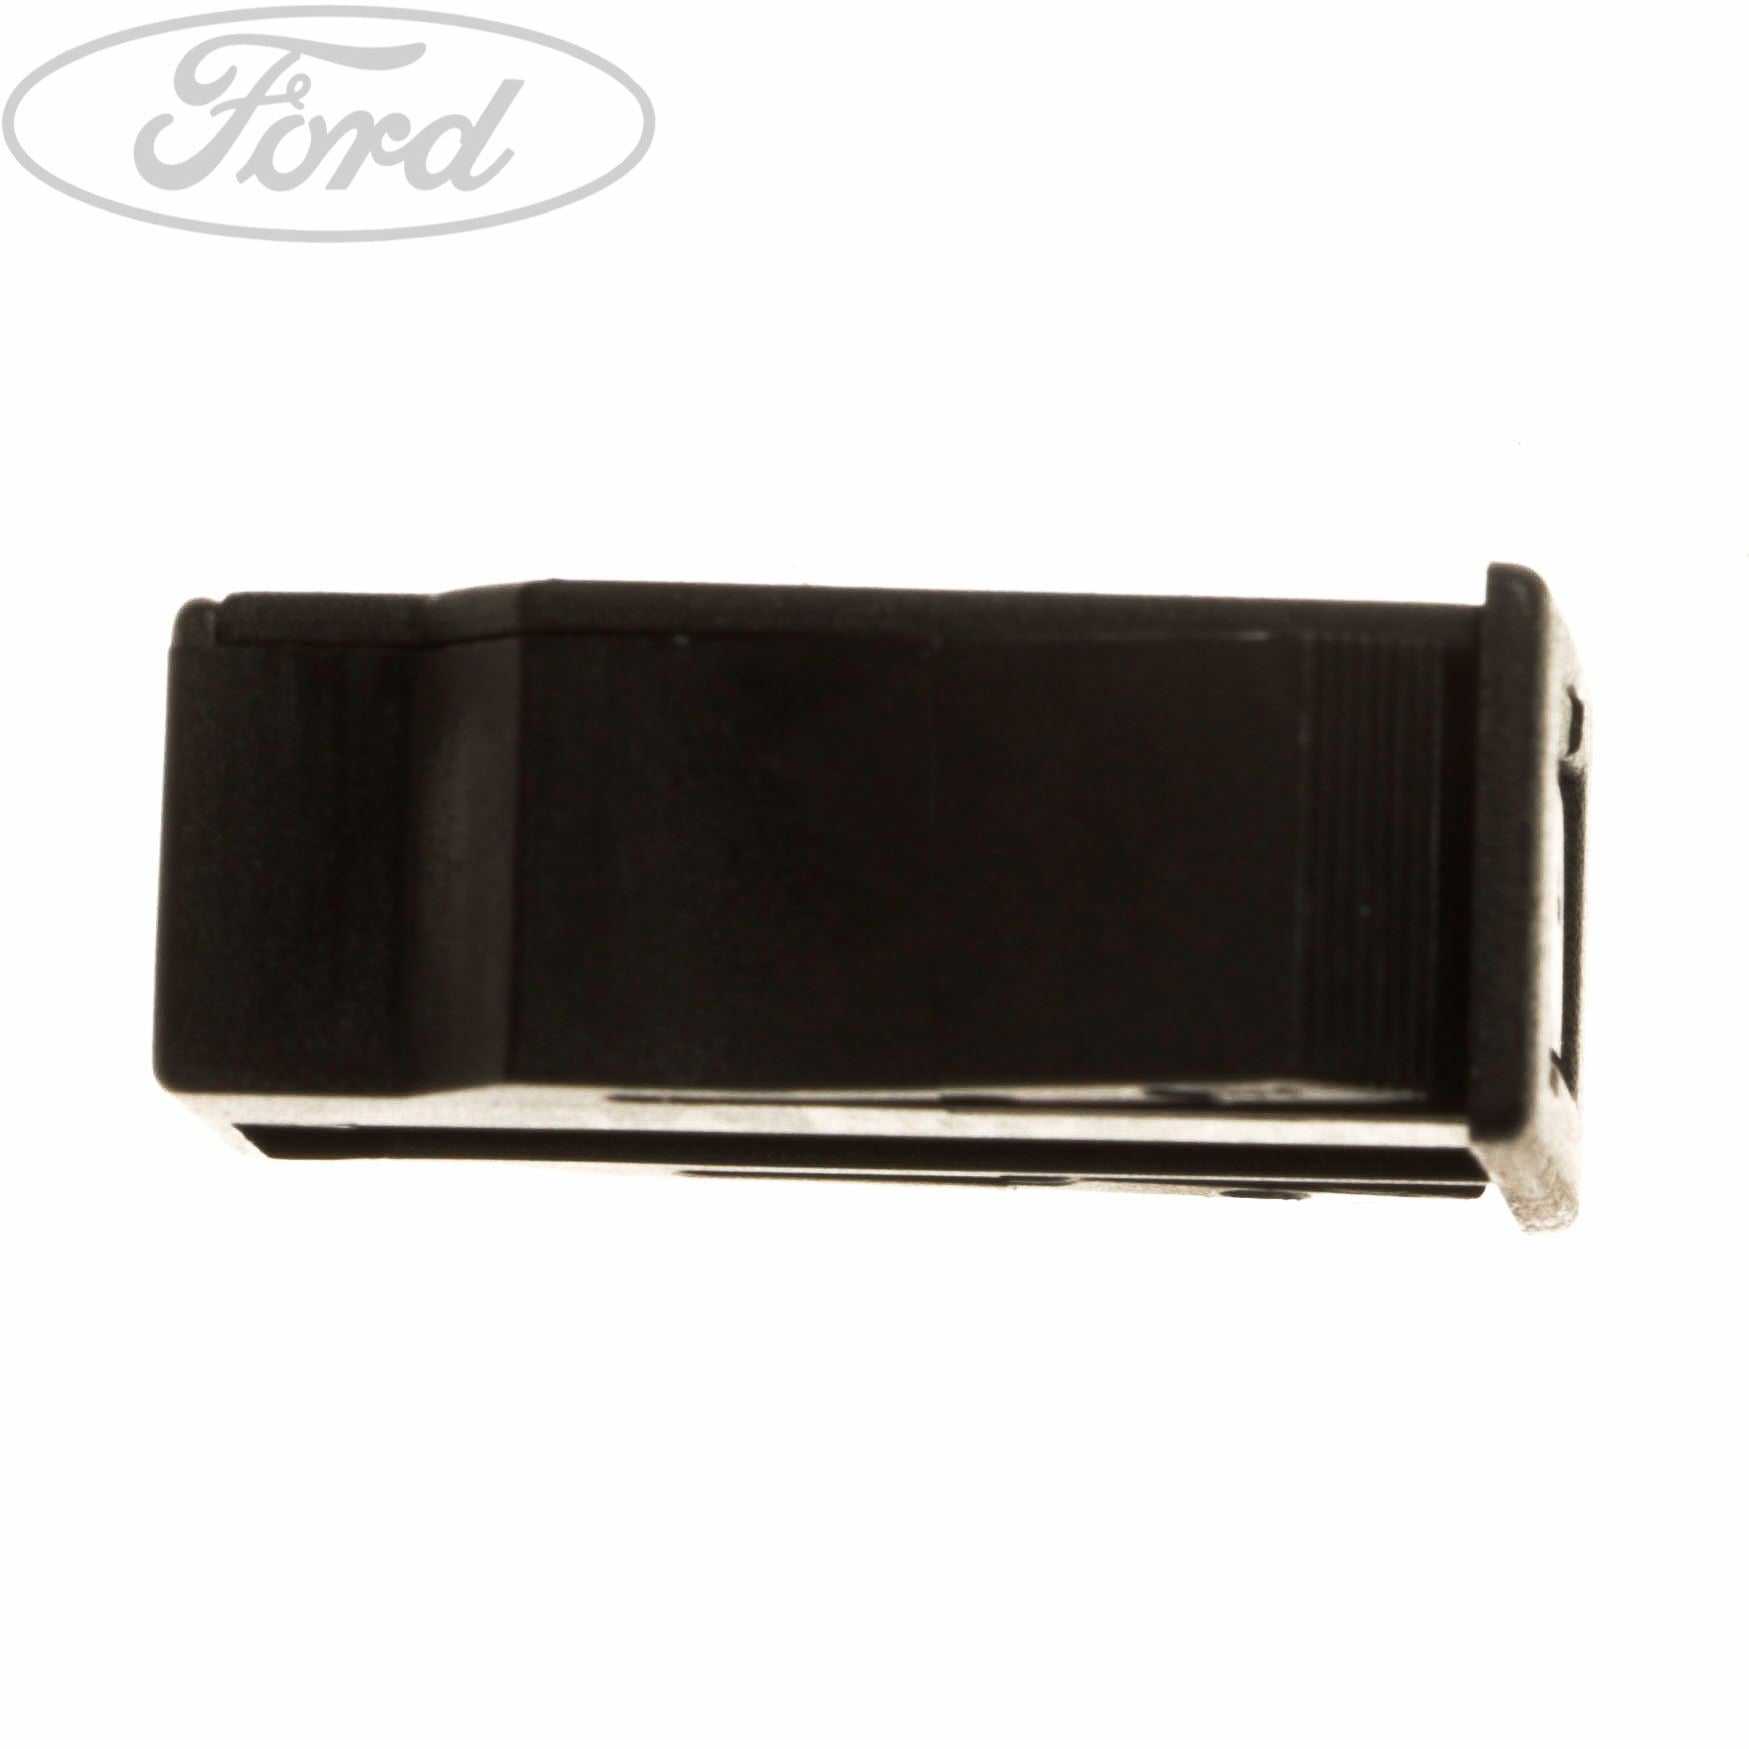 Ford, STOWAGE BOX DOOR CATCH